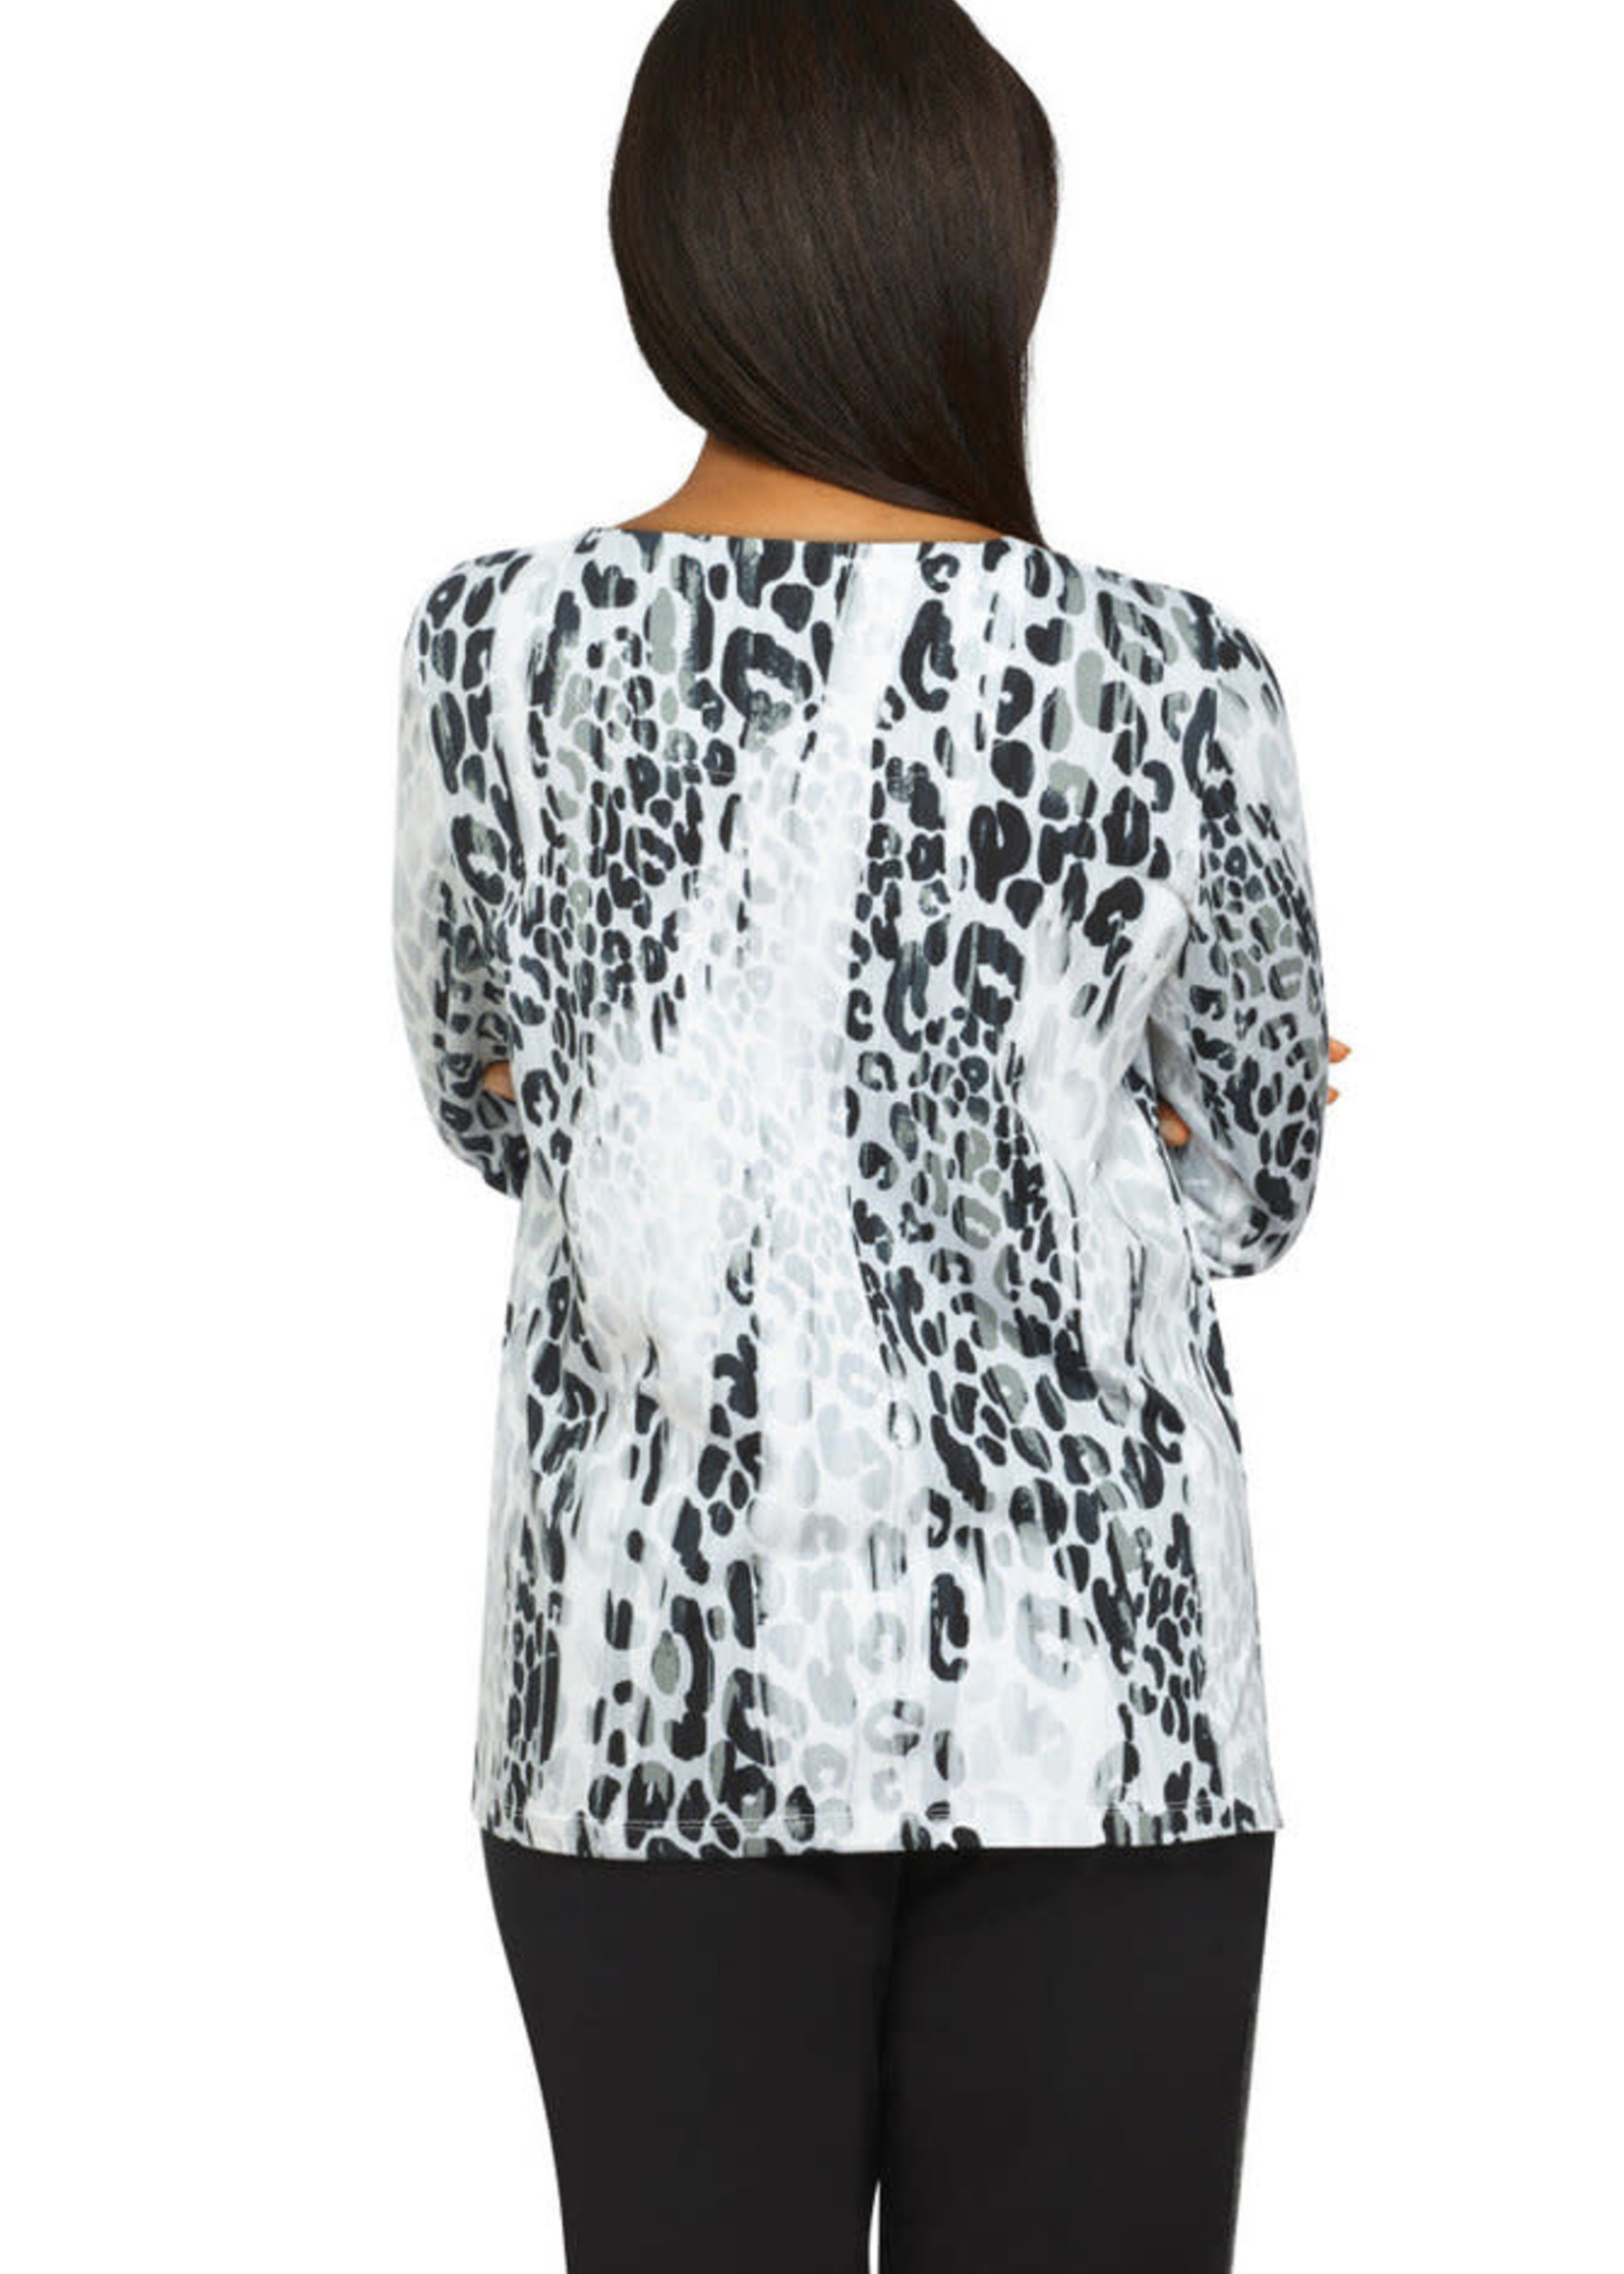 Alfred Dunner Animal Print Top